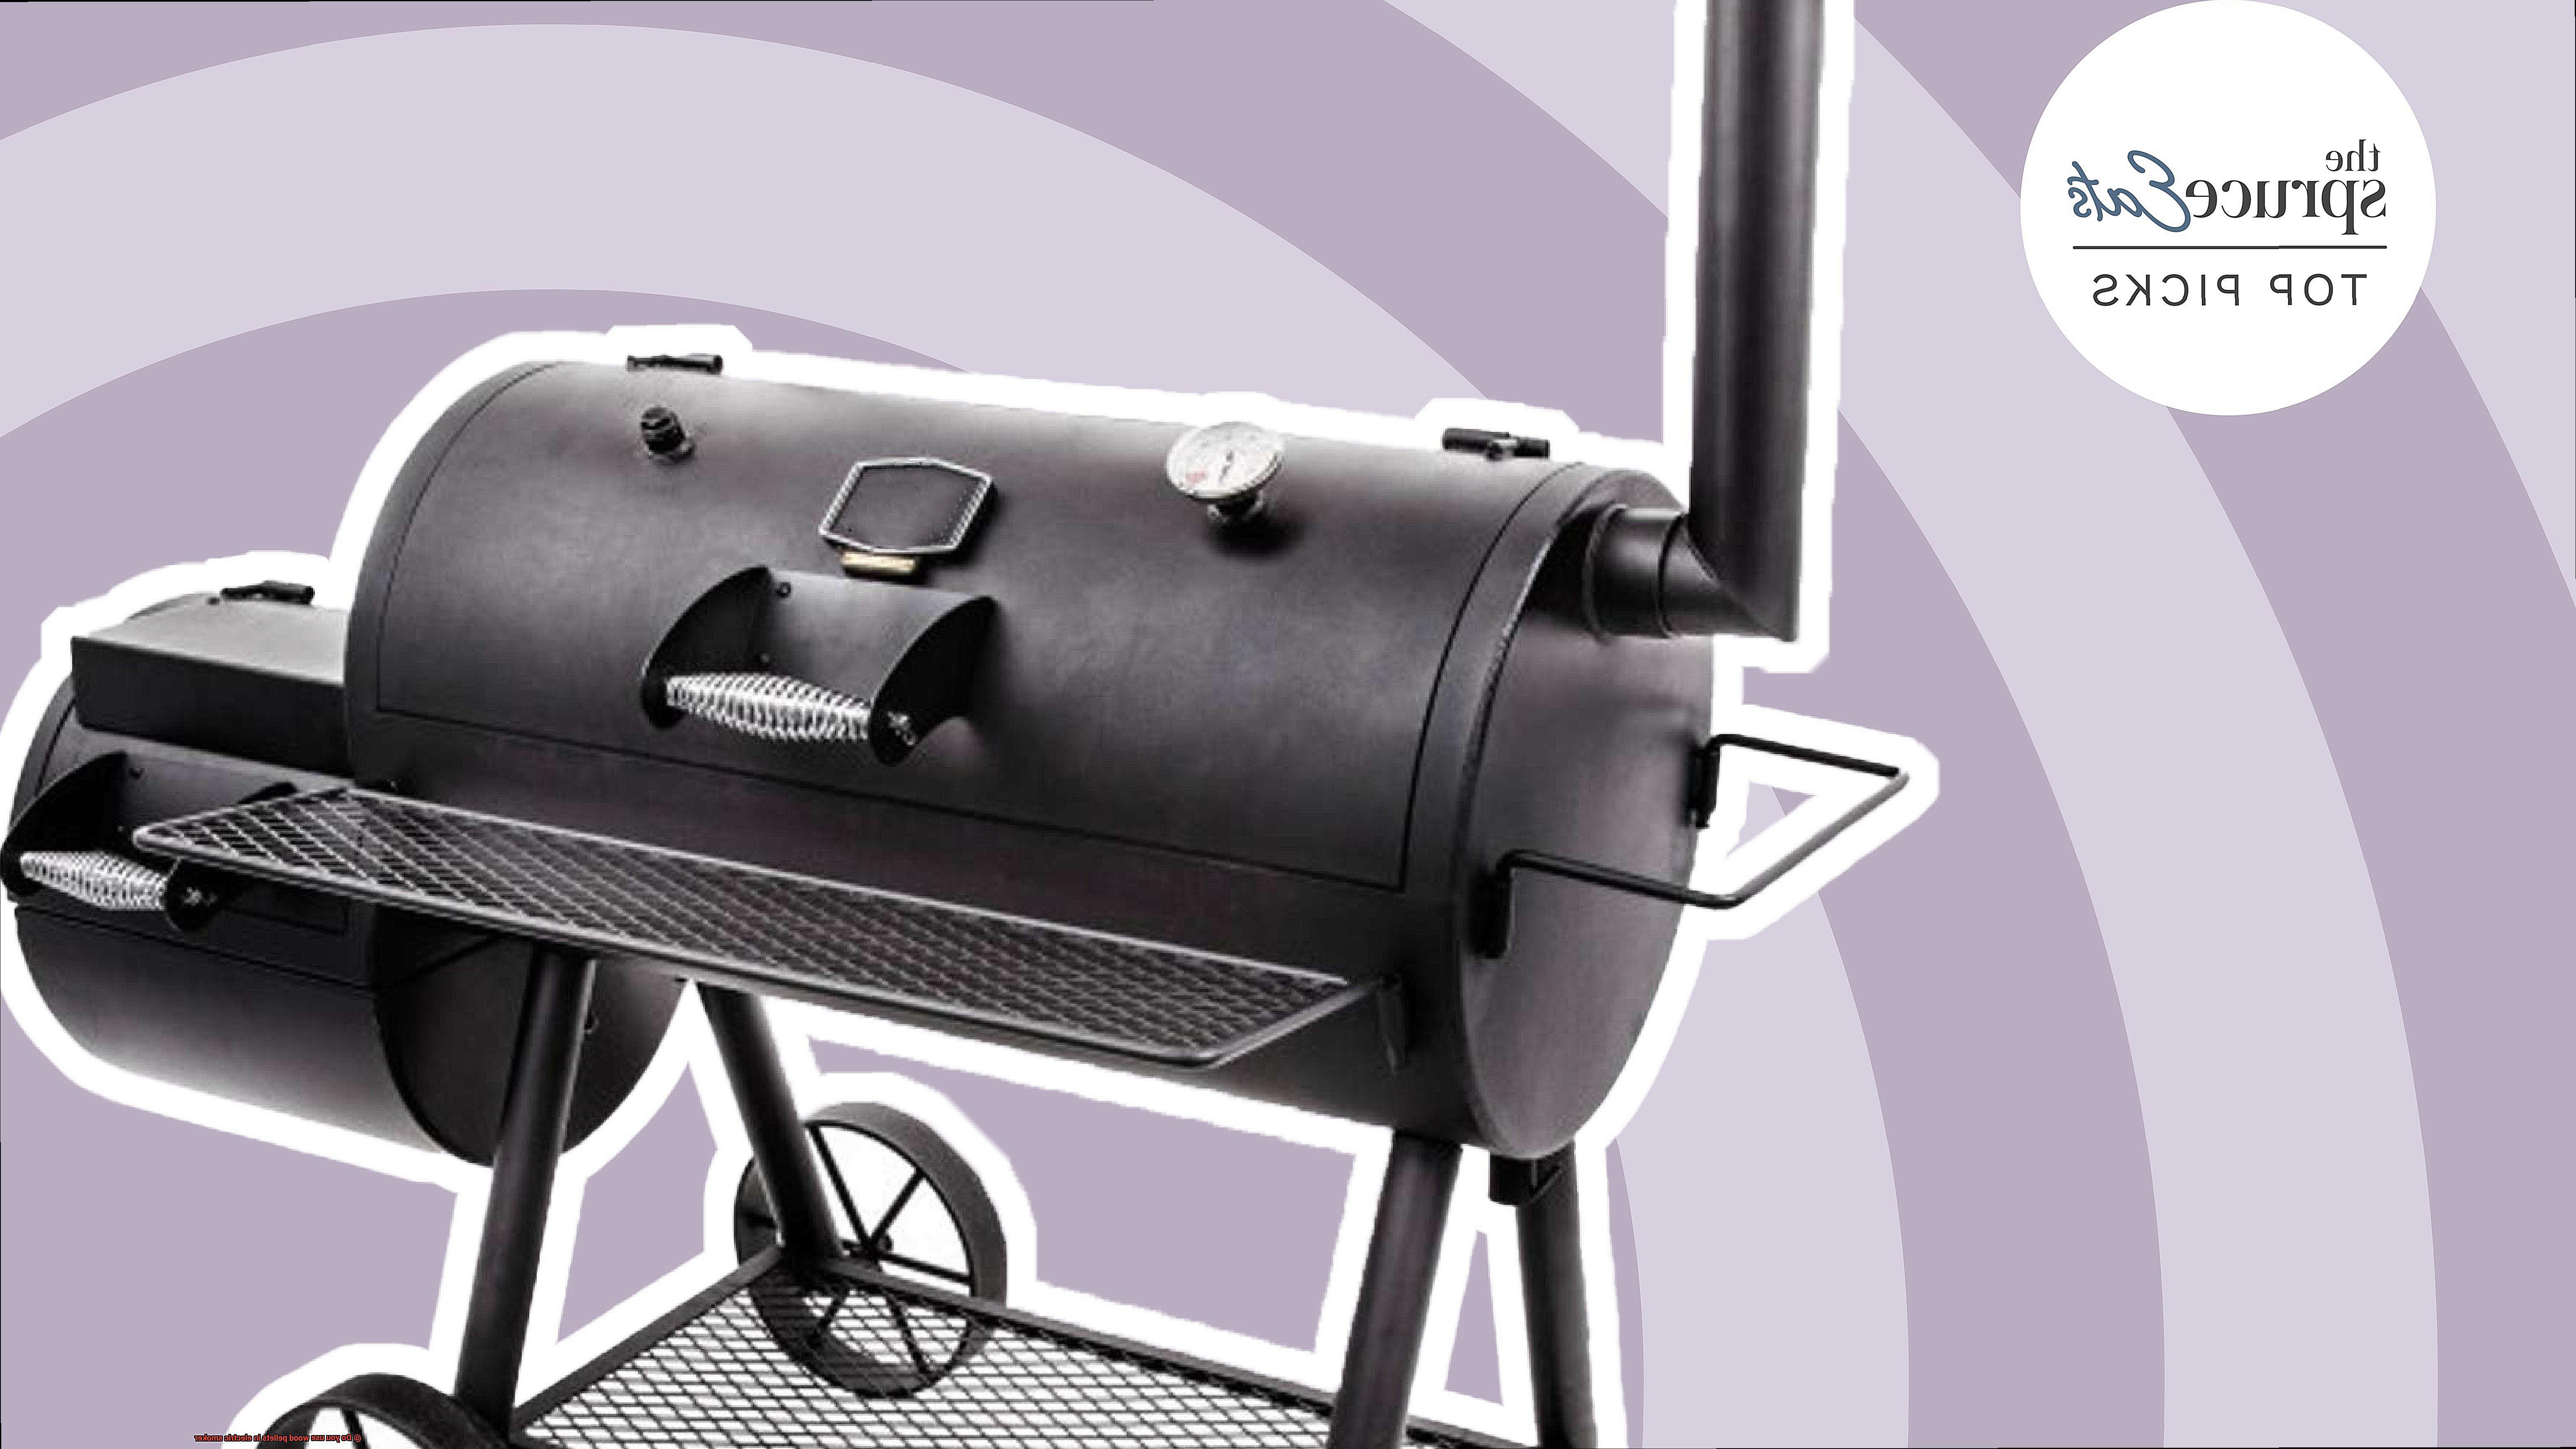 Do you use wood pellets in electric smoker-2